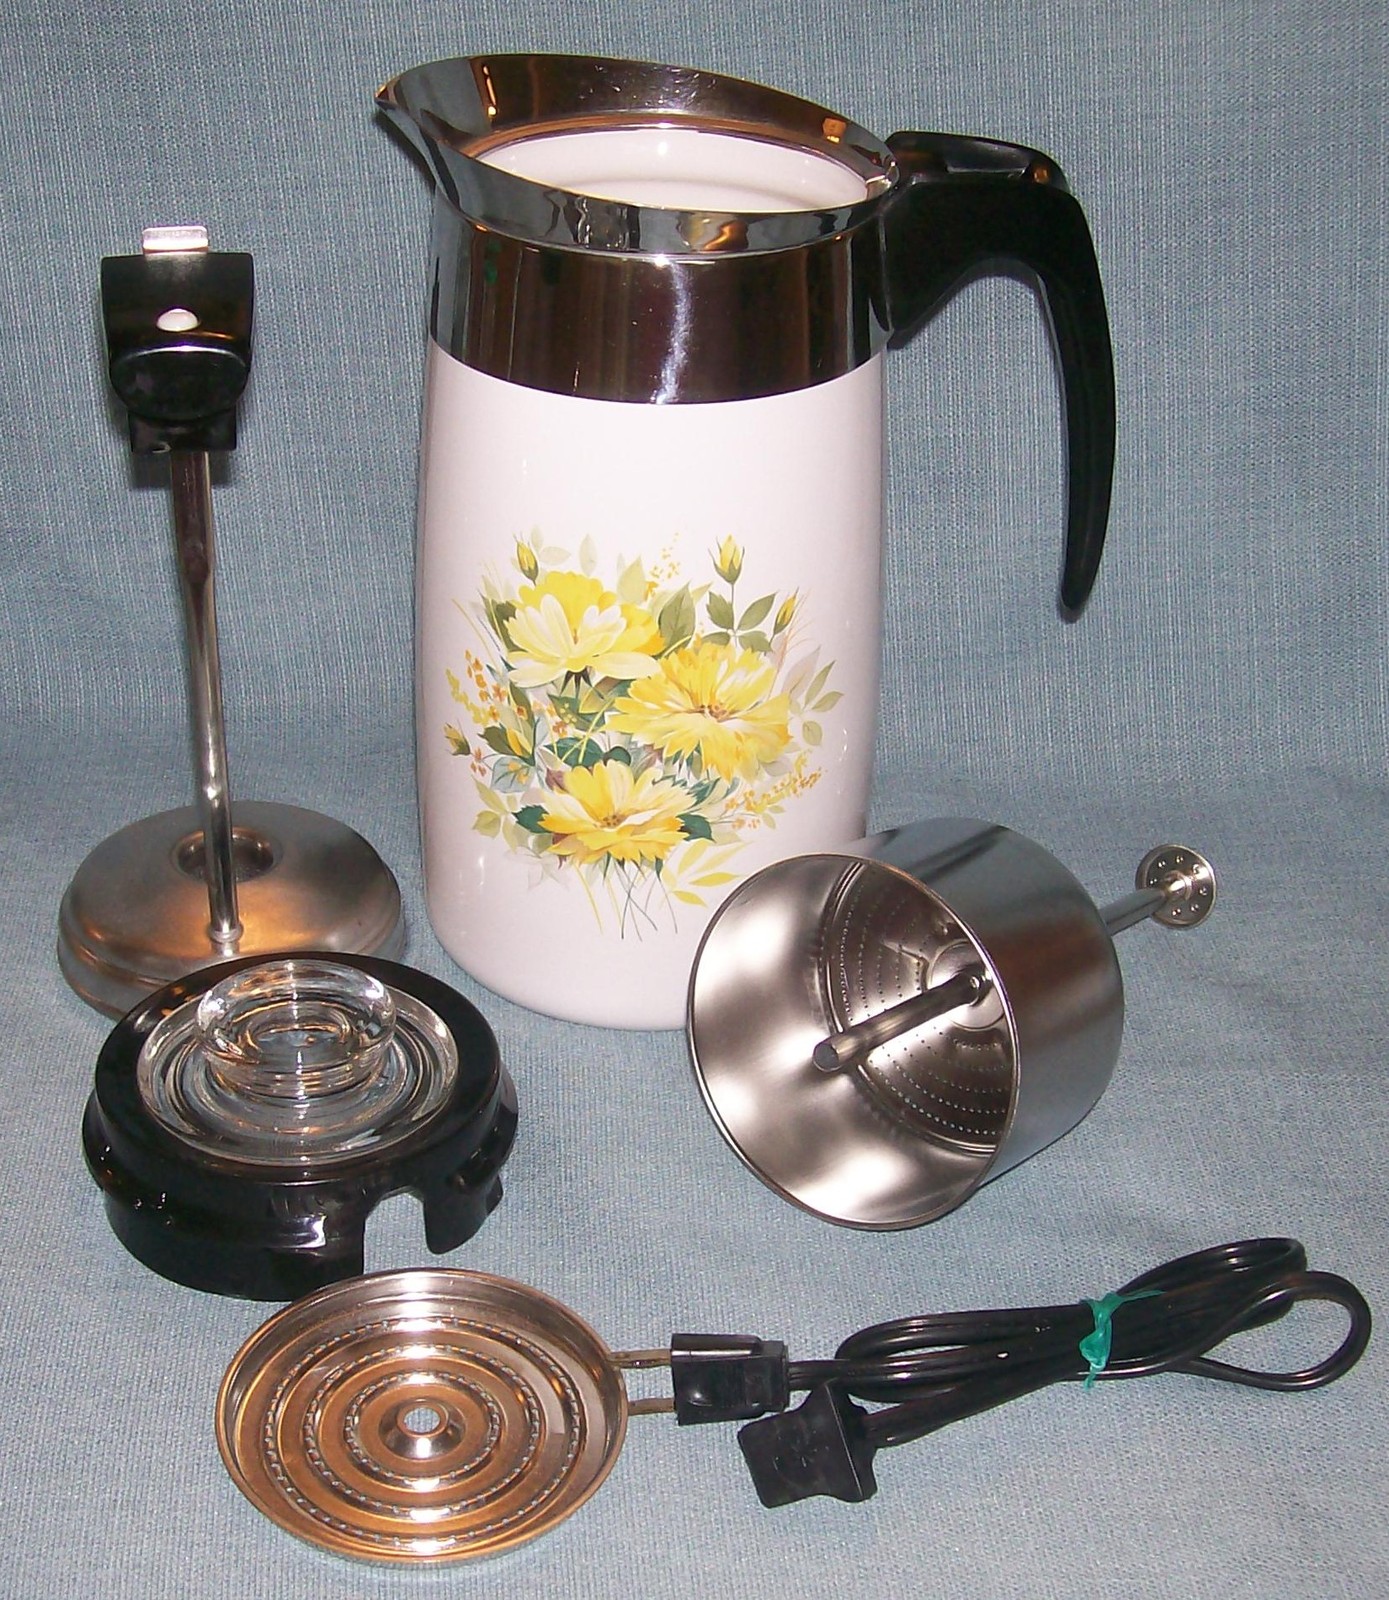 Vtg Farberware 2 8 Cup Coffee Pot Stainless Steel & Chrome Electric  Percolator Model 138B 